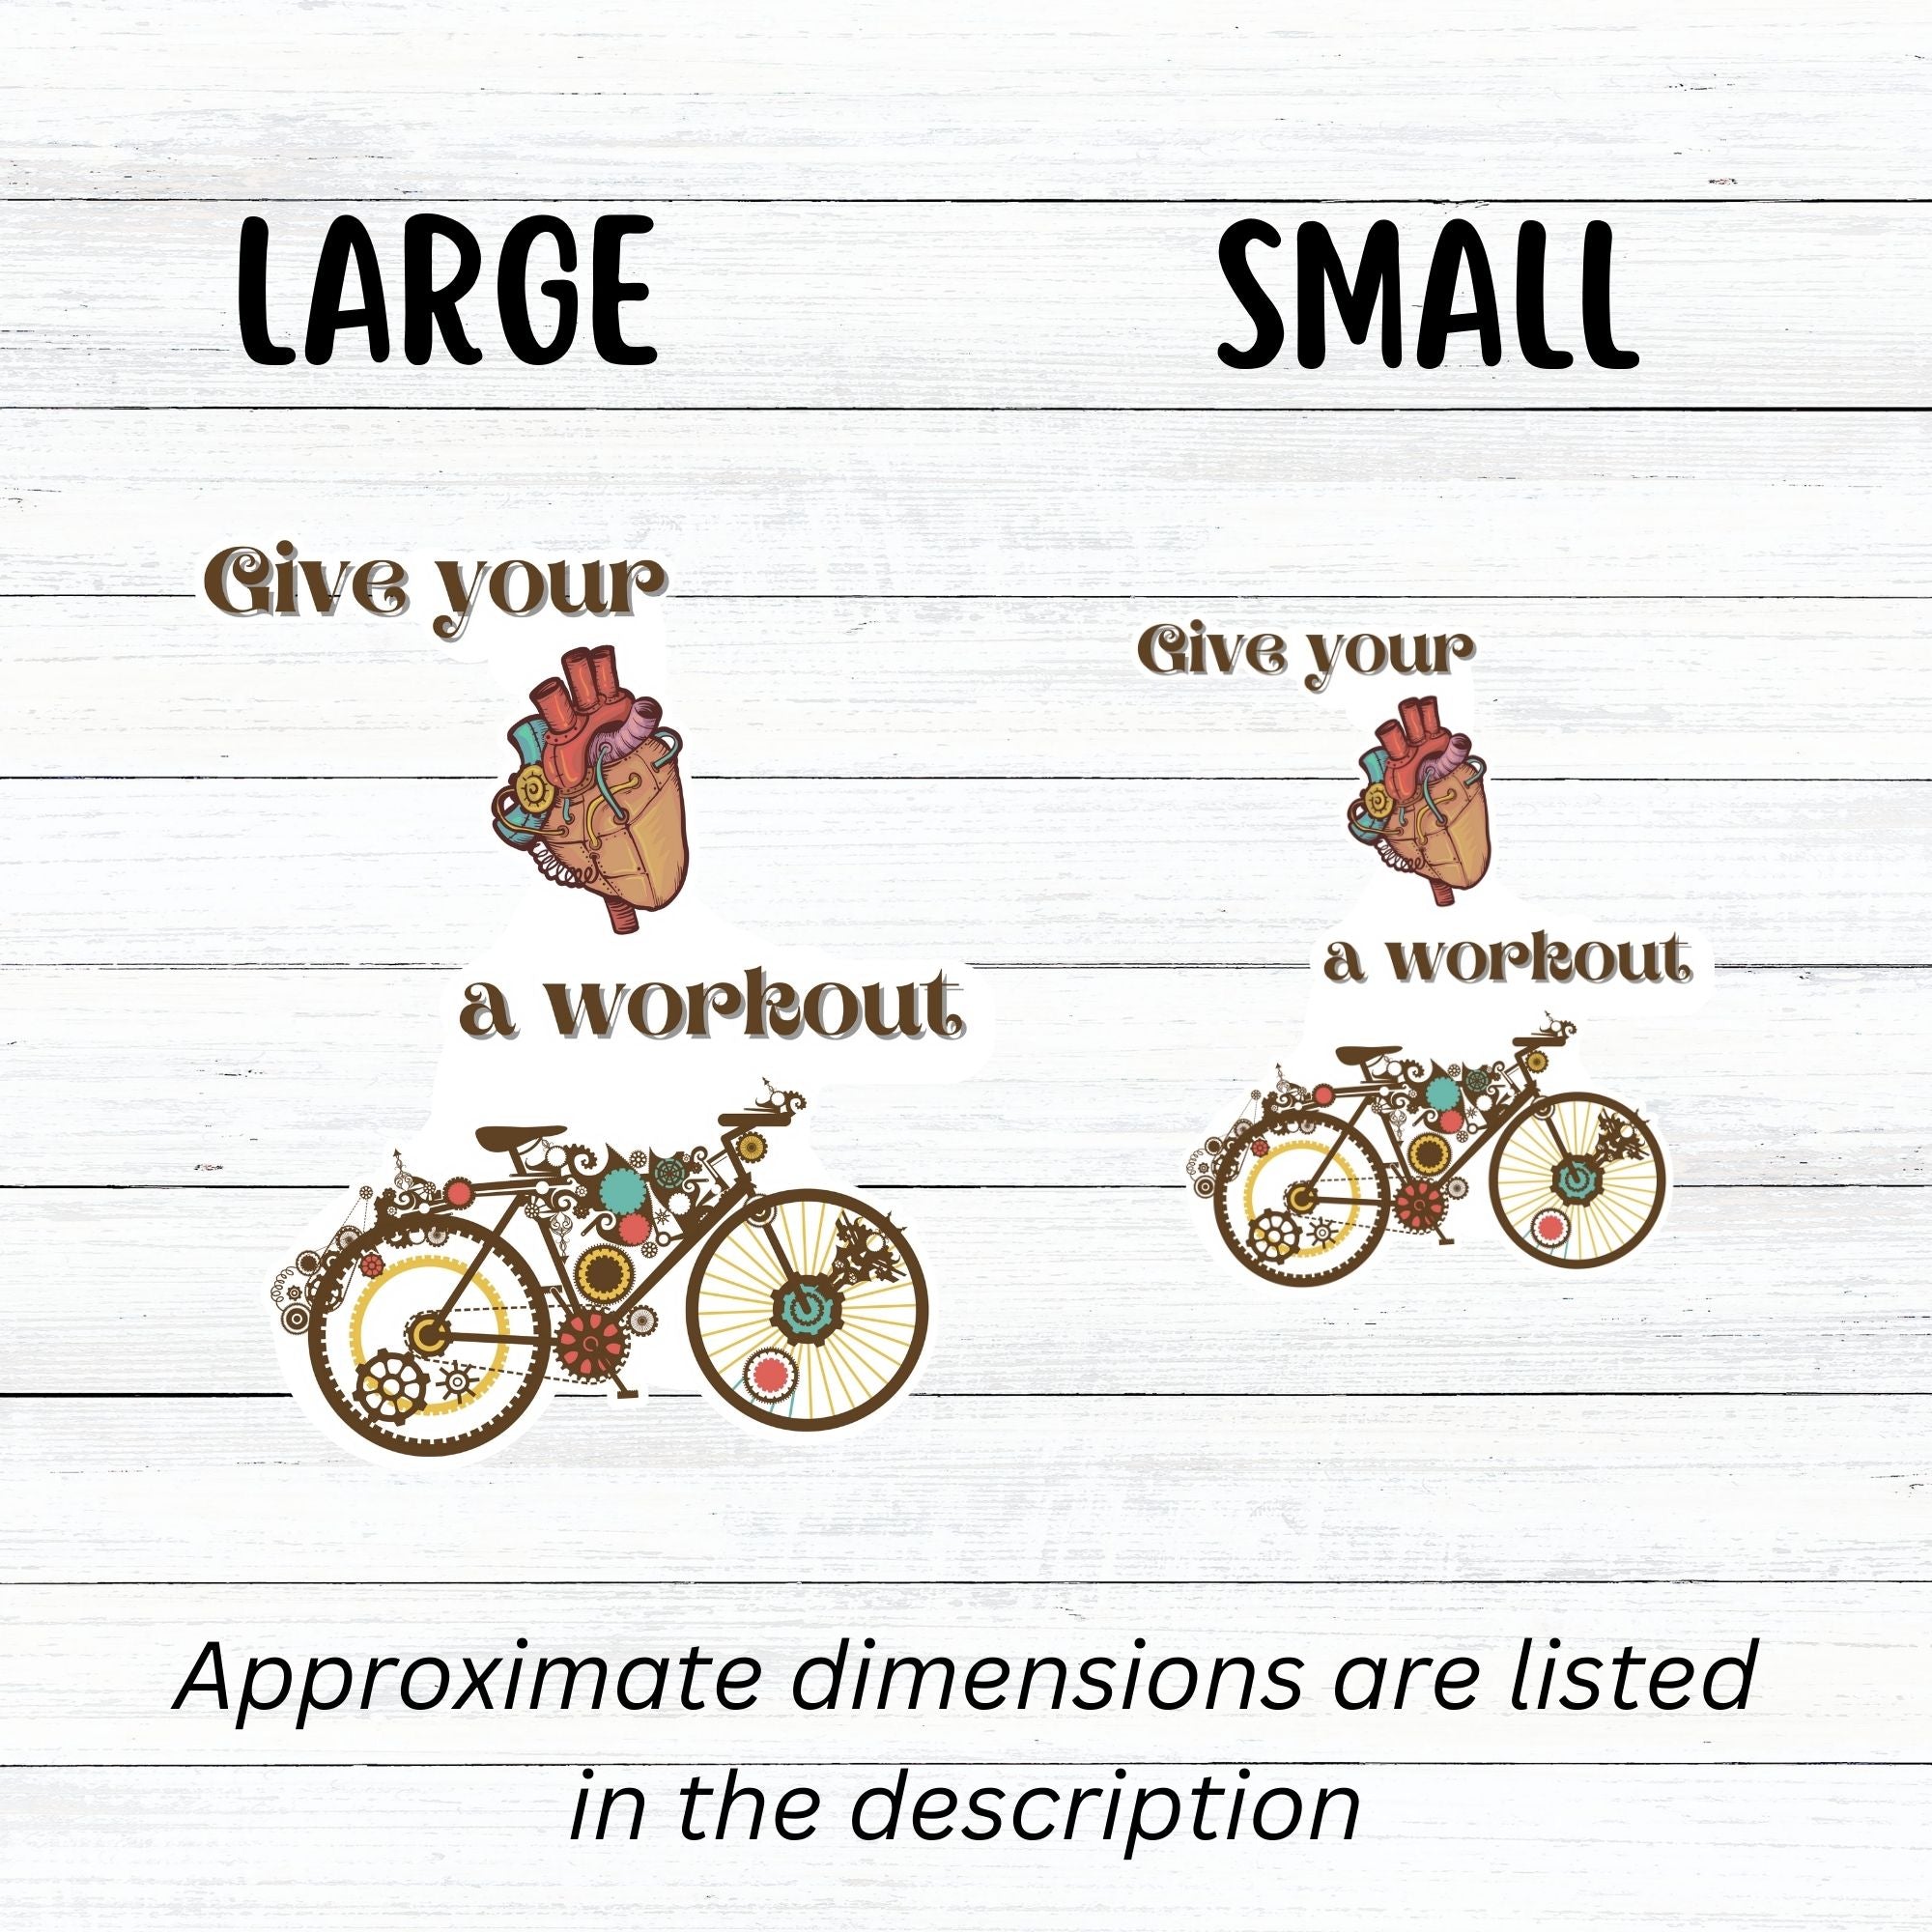 Give your heart a workout! This steampunk sticker has a steampunk anatomic heart and a steampunk bicycle. This image shows a large and small steampunk workout sticker next to each other.